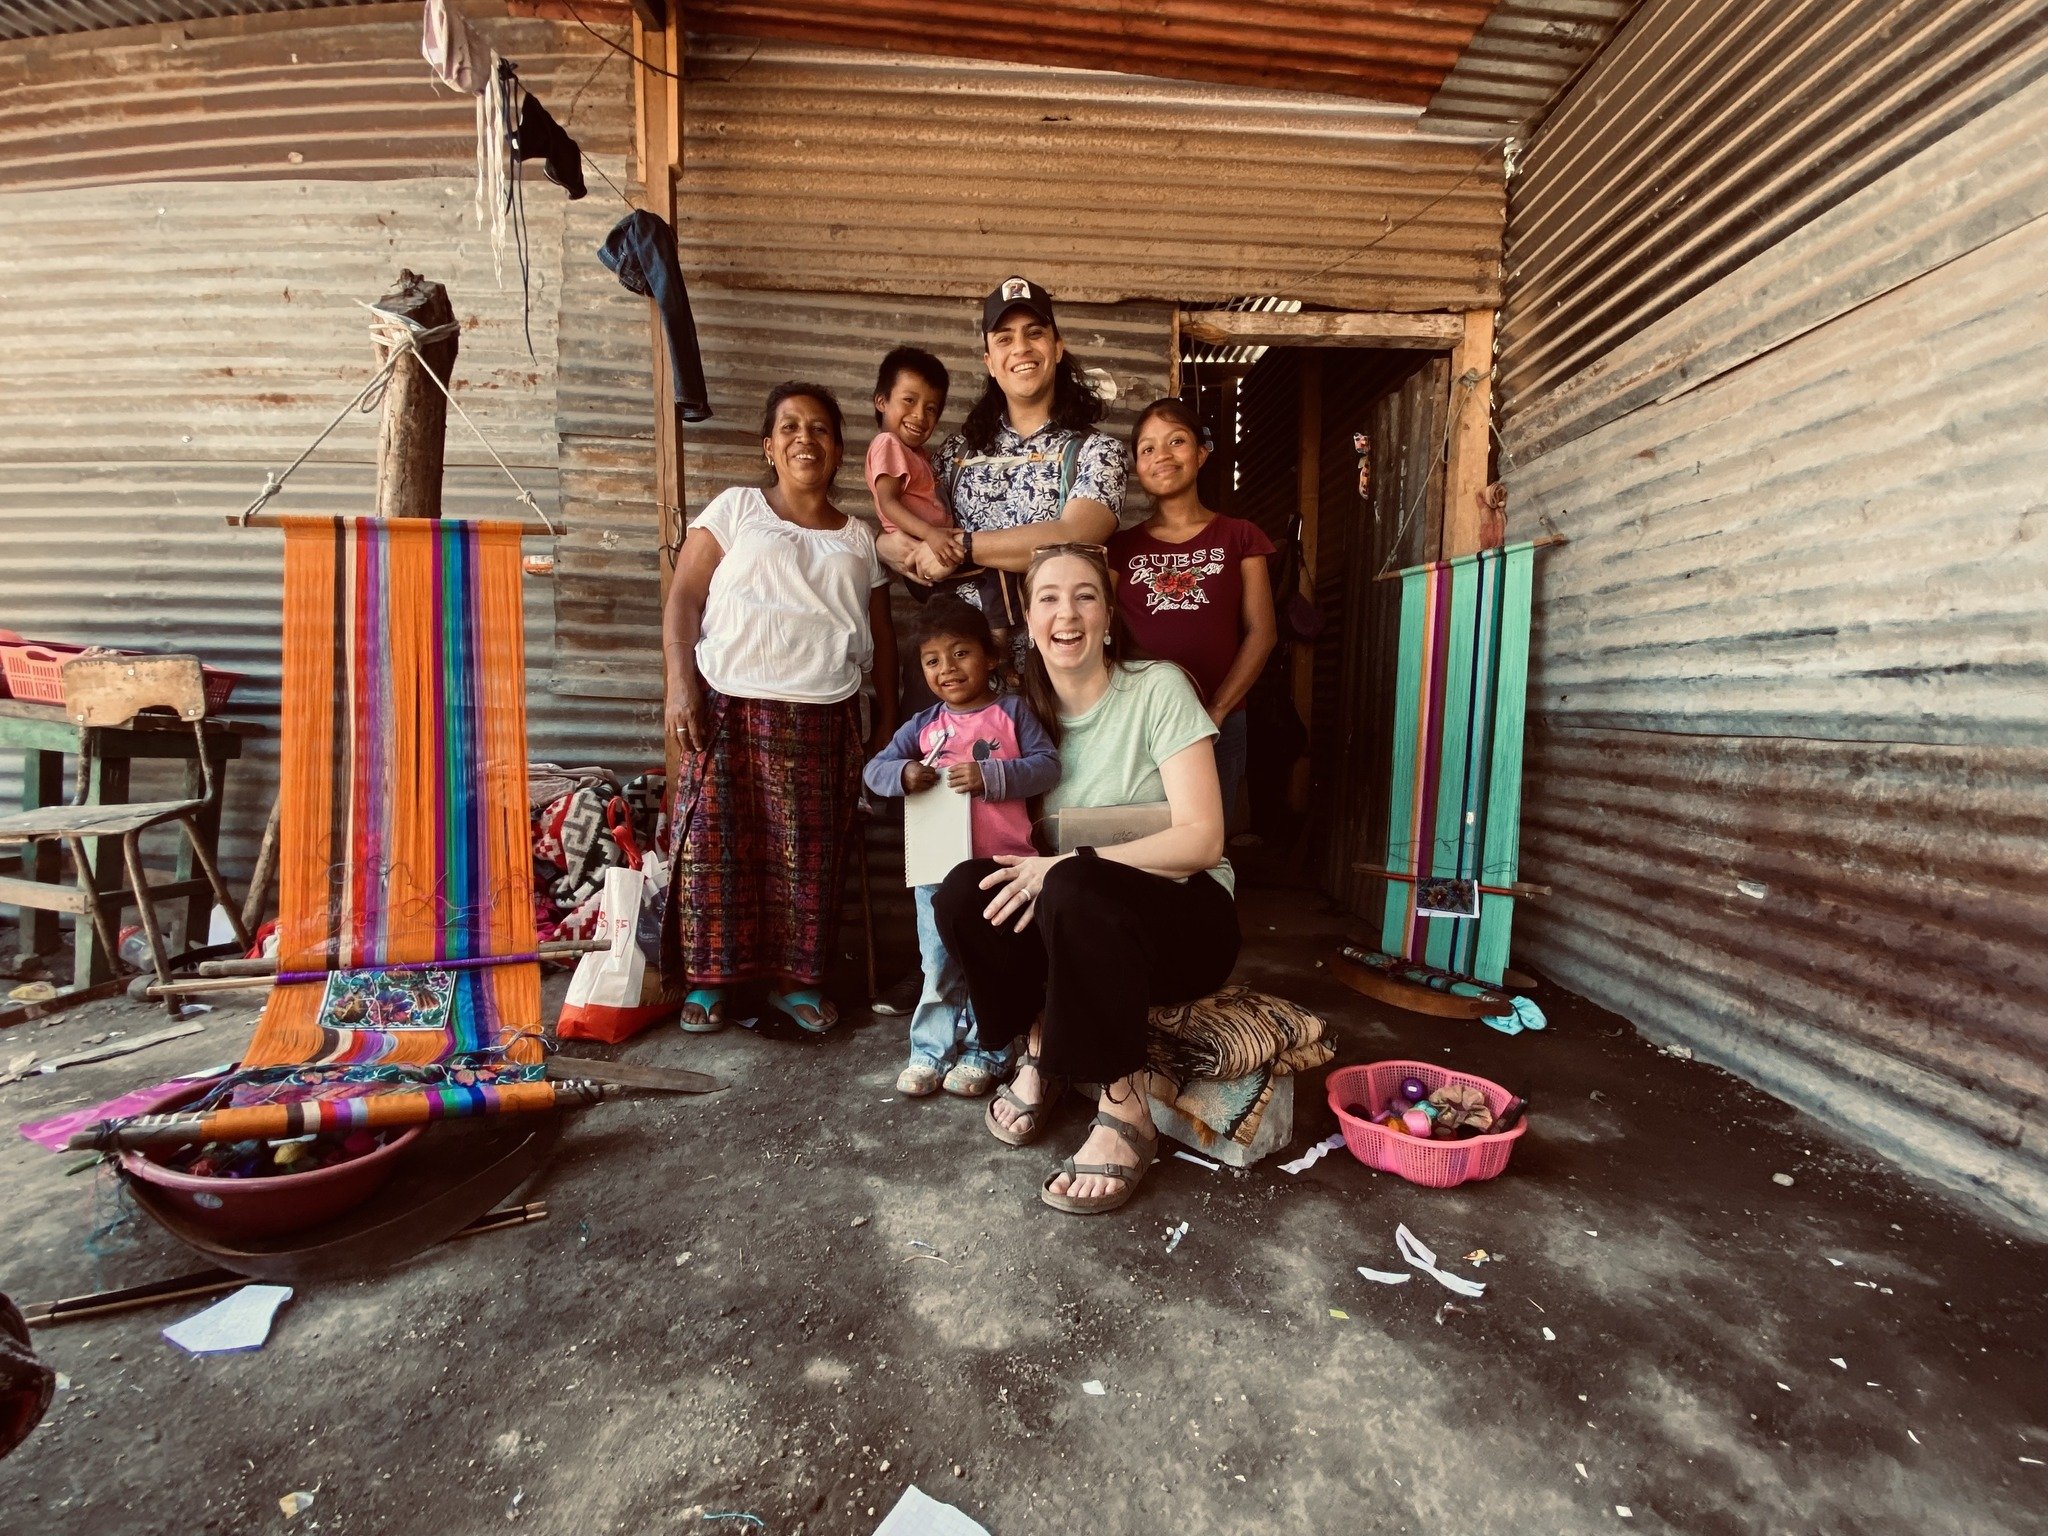 In Guatemala, our partners work to holistically care for the children.  One aspect of this are regular home visits.  When you visit Guatemala- you can be a part of discipling not only to the children, but their families.

#GOTrips, #GOServe #HOPE #Gu